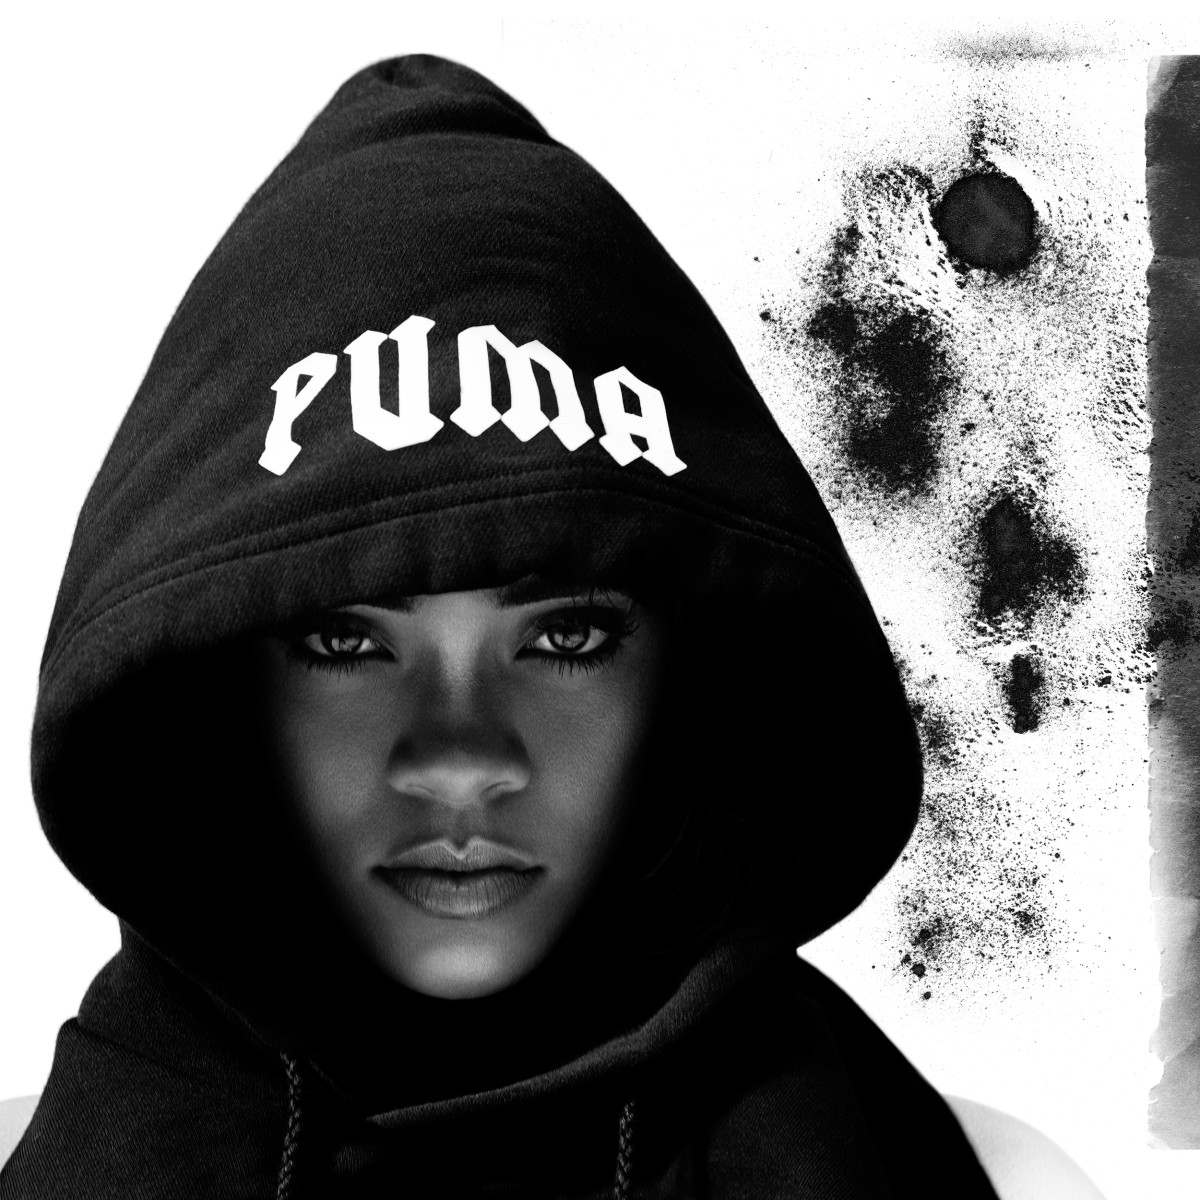 Like A Phoenix: How Puma rose from the ashes.